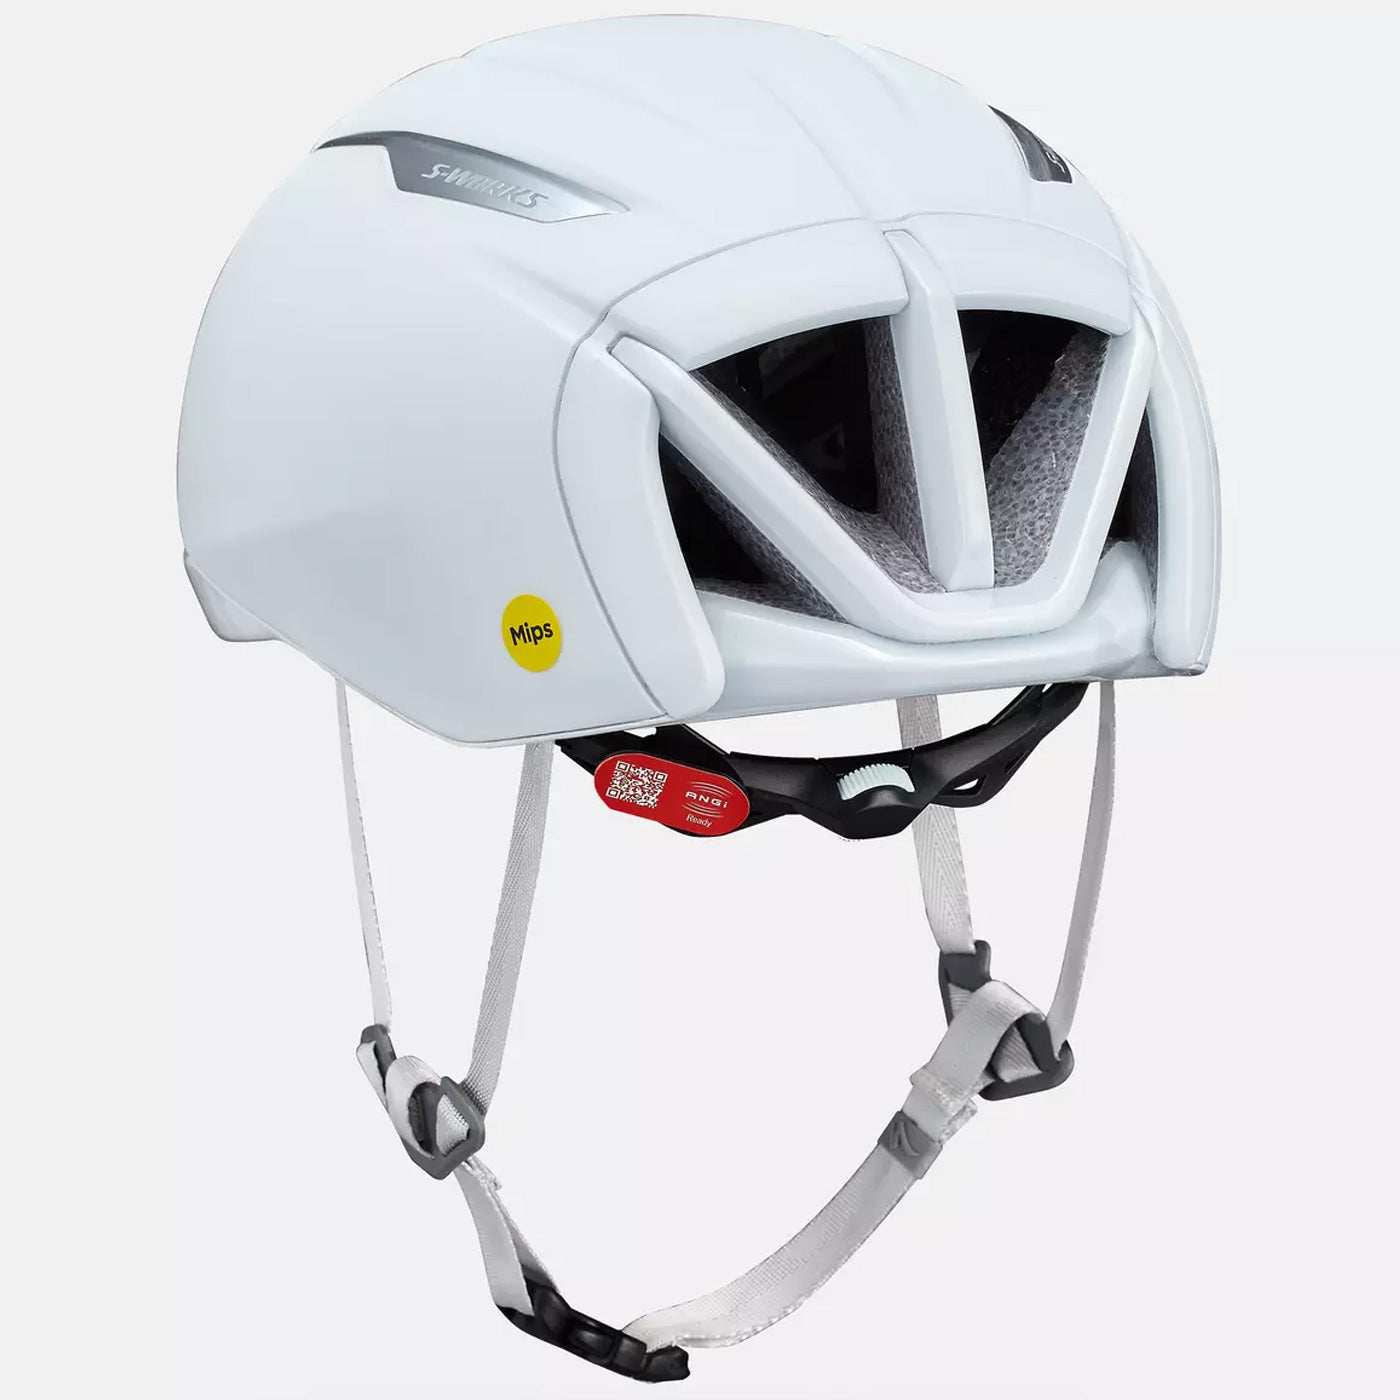 Specialized Evade 3 helm - Weiss